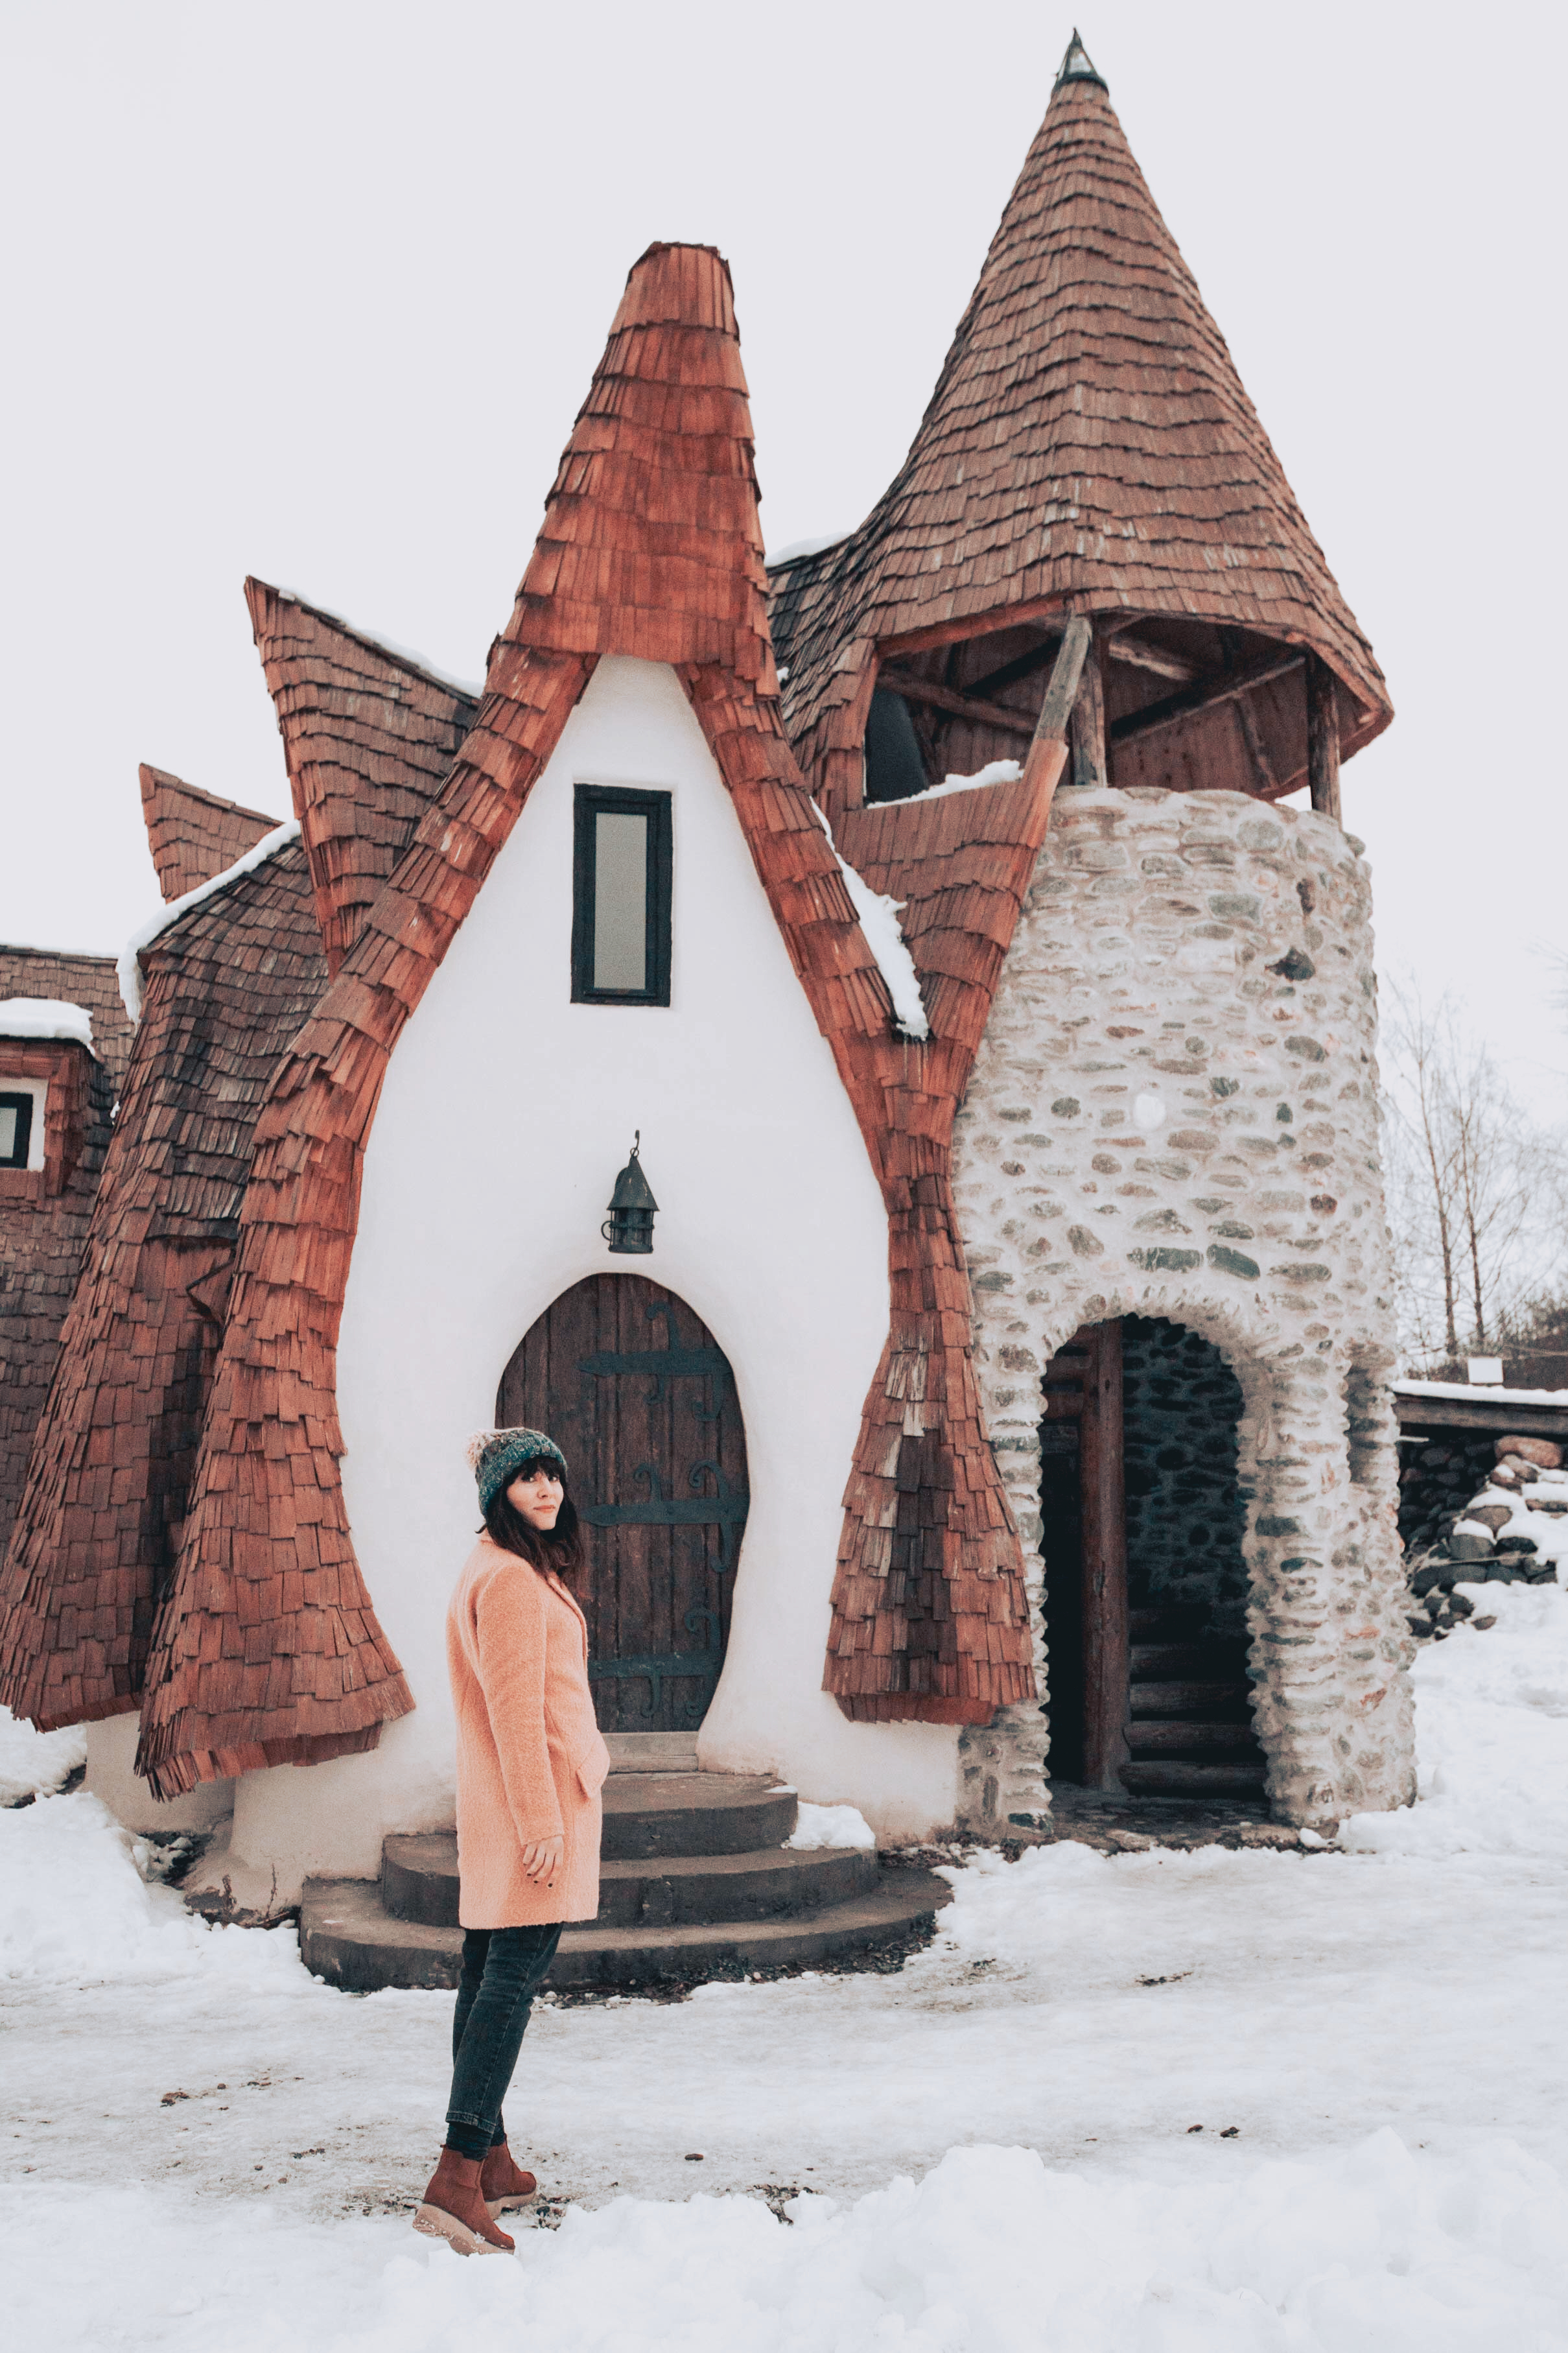 Romania hidden gems: The Clay Castle of the Valley of Fairies